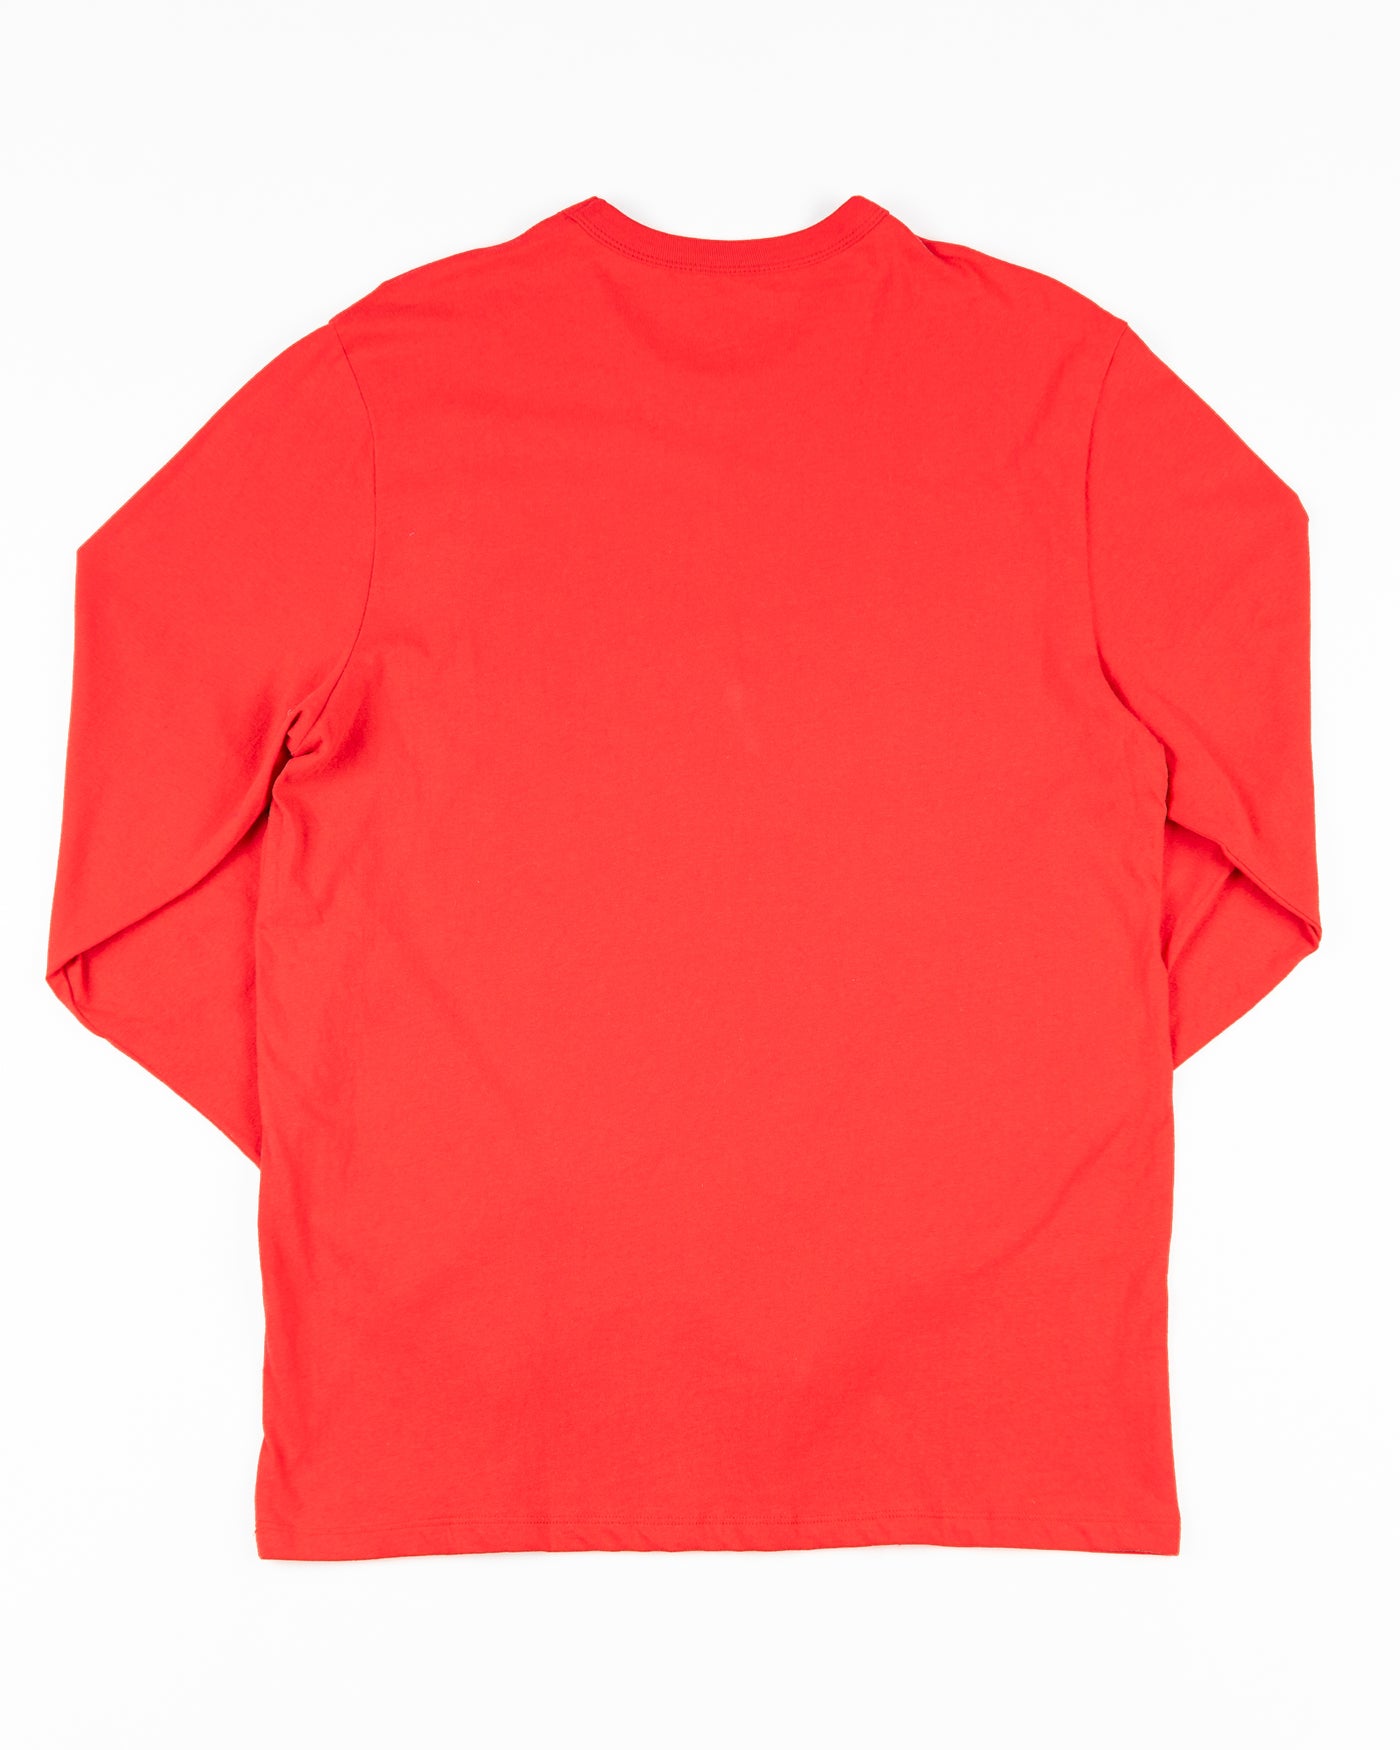 red '47 brand long sleeve tee with Chicago Blackhawks wordmark and primary logo across chest - back lay flat